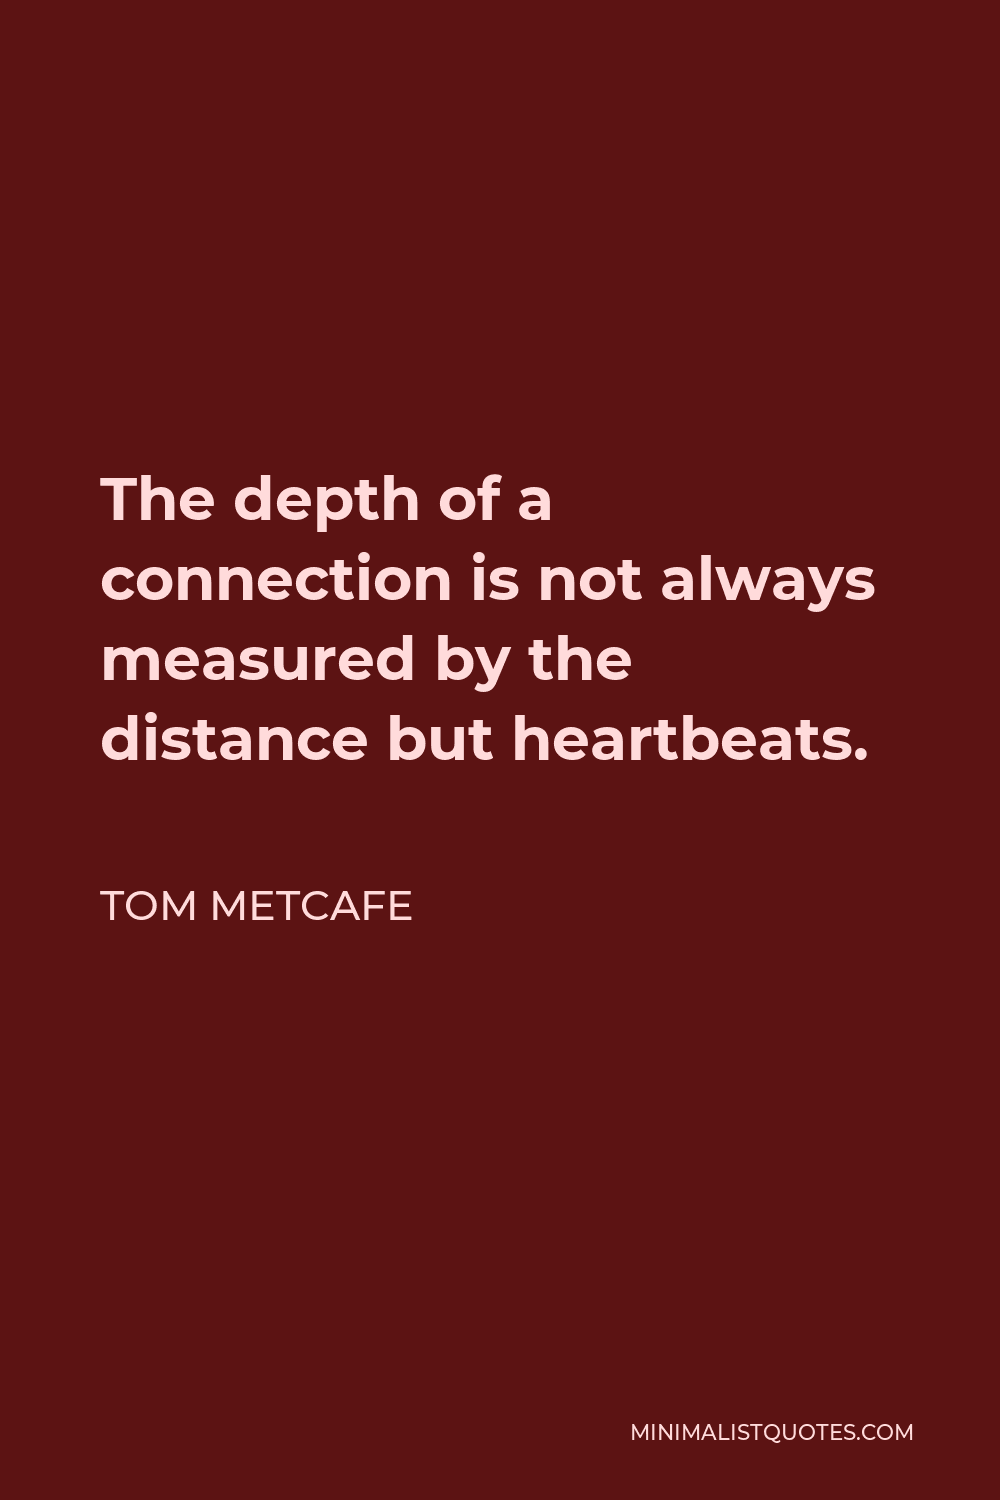 Tom Metcafe Quote - The depth of a connection is not always measured by the distance but heartbeats.